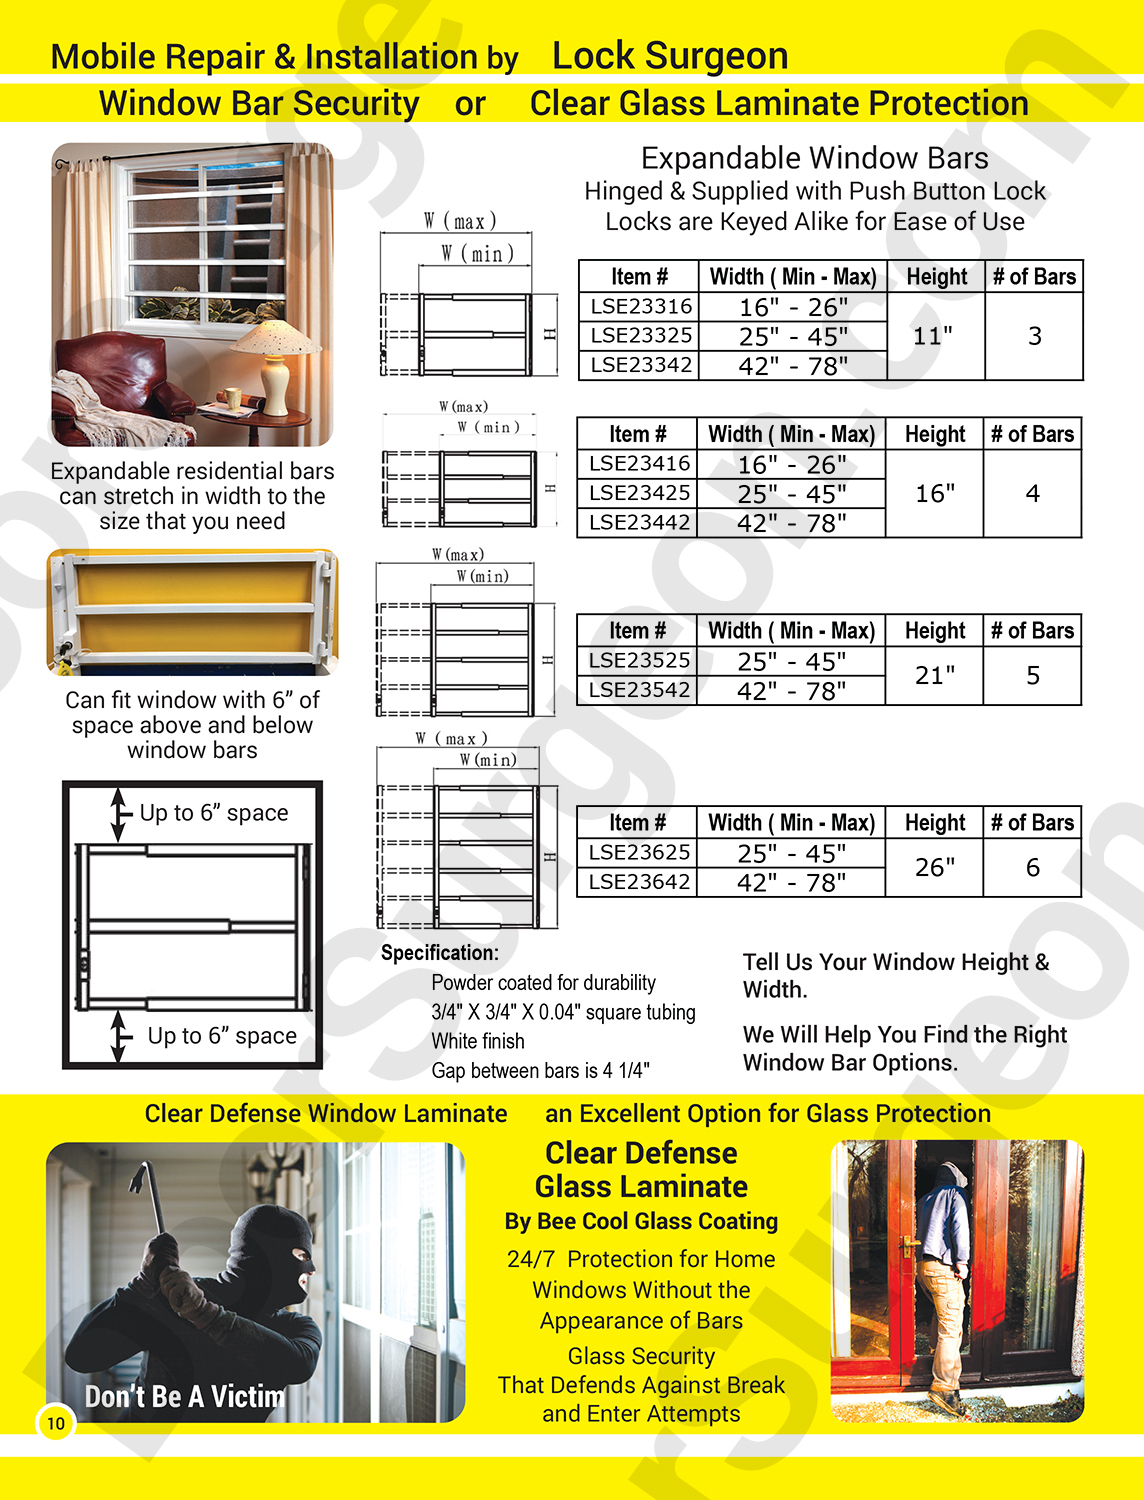 Expandable window bars for home or business window protection in custom or fixed sizes.